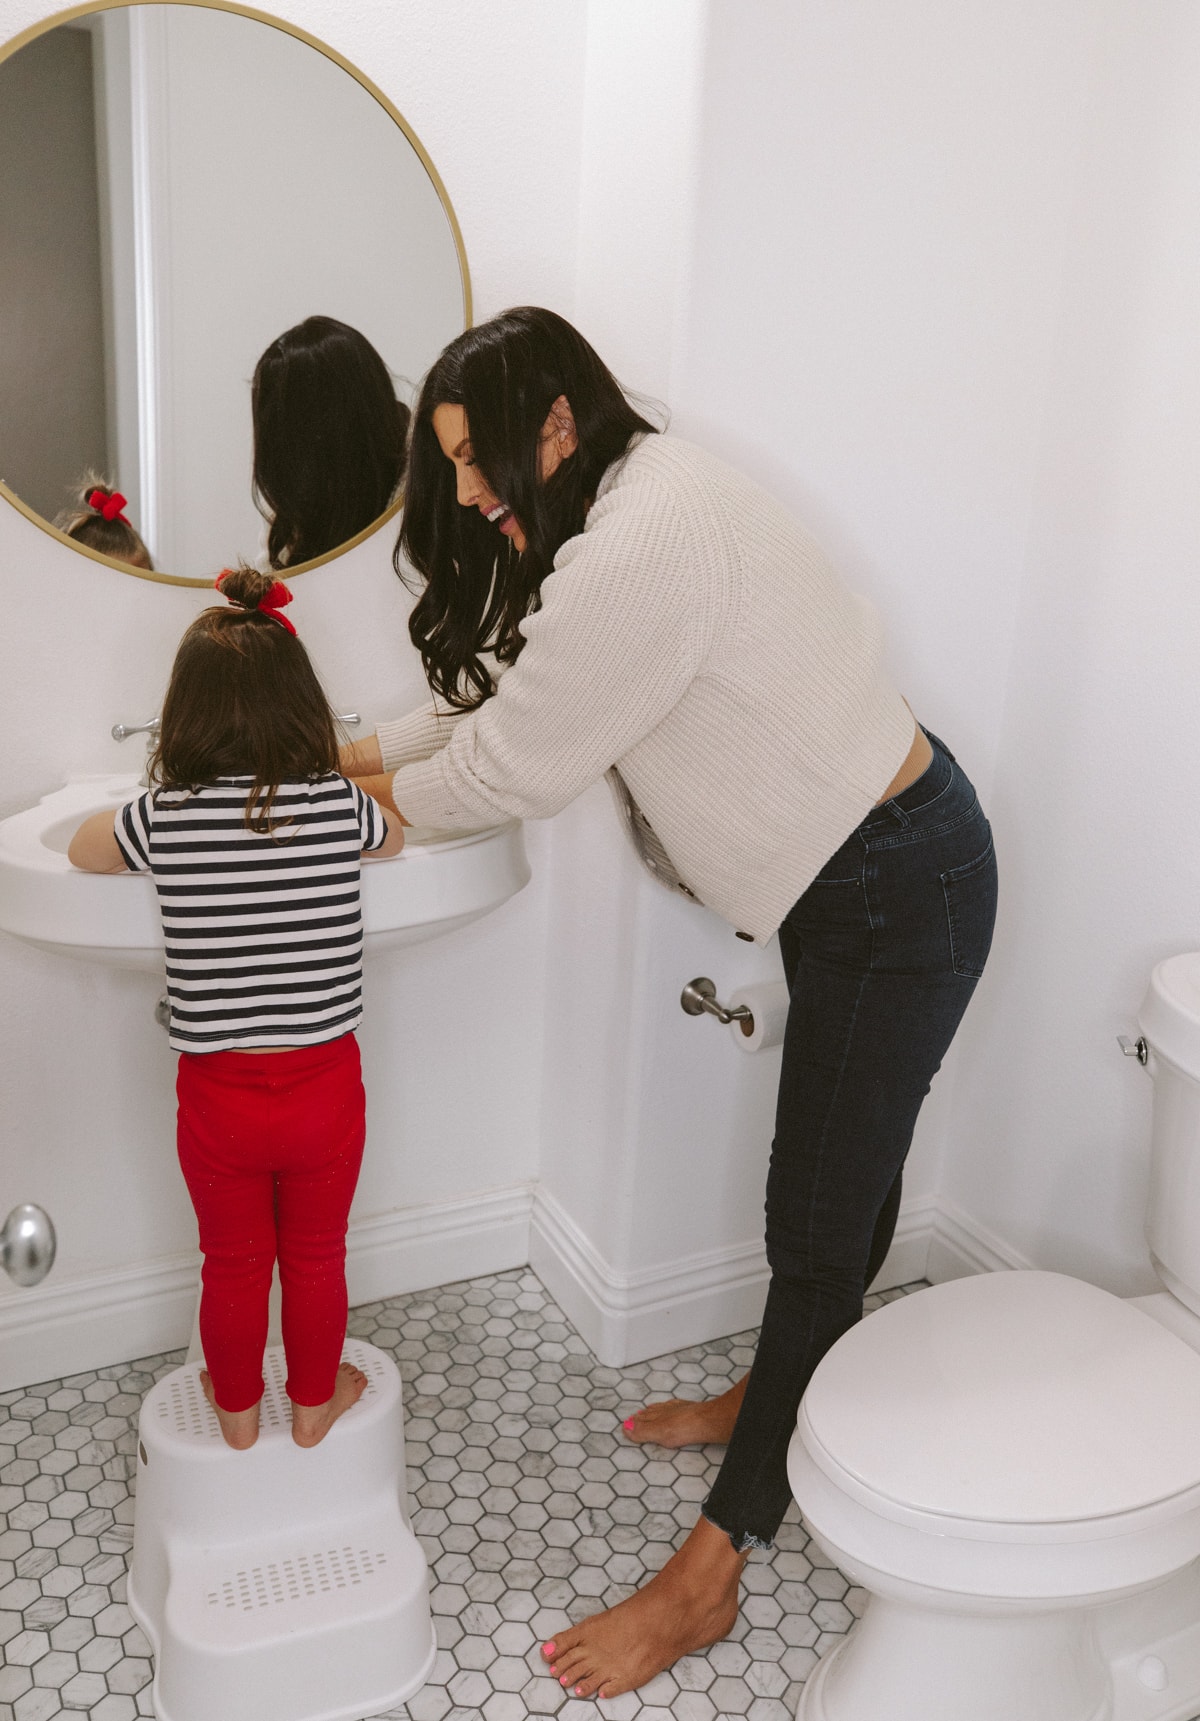 Potty Training 101: Tips and Tricks for Success